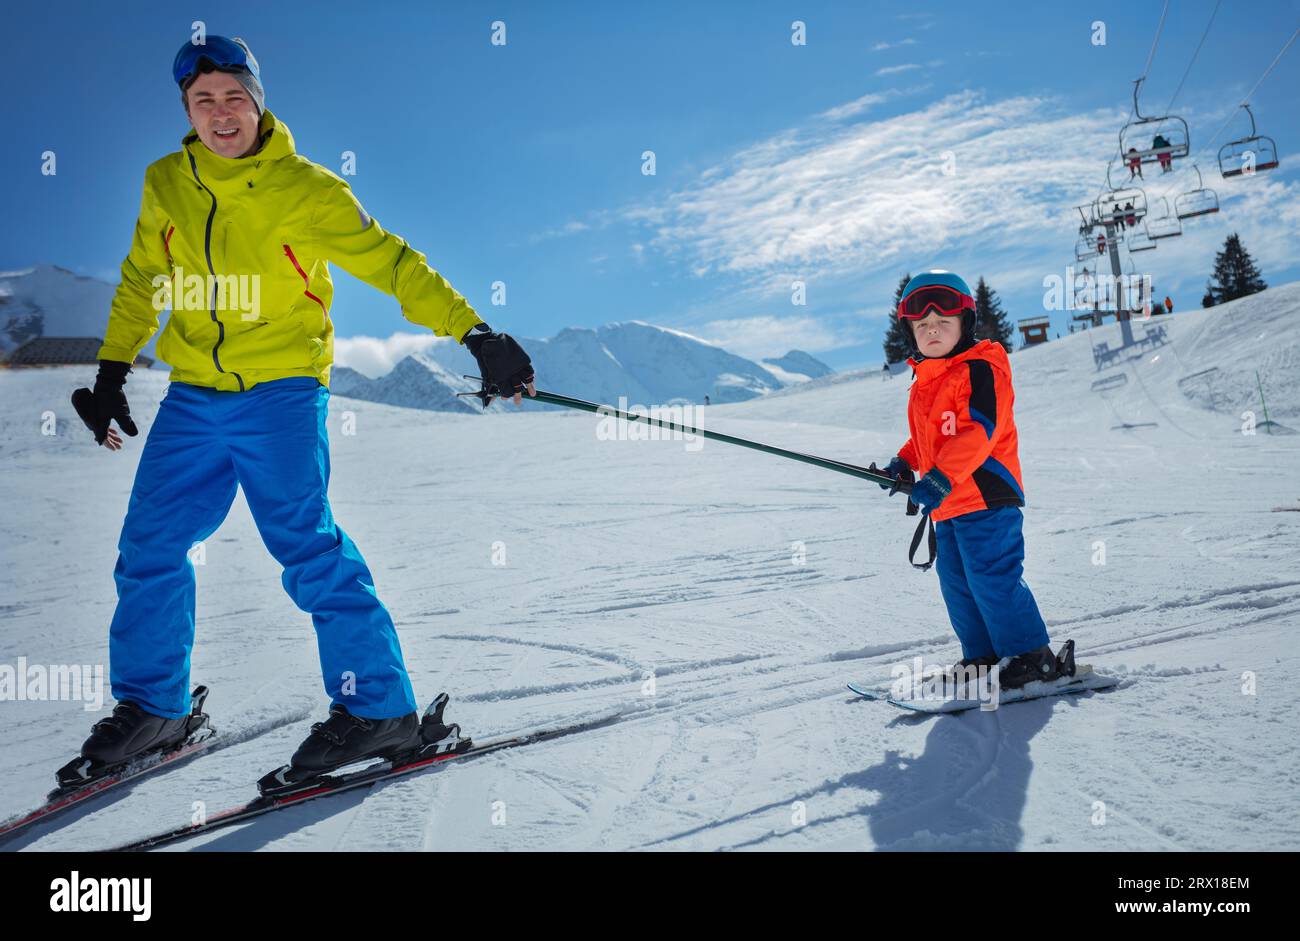 Dad go downhill teach child to ski connected by poles Stock Photo